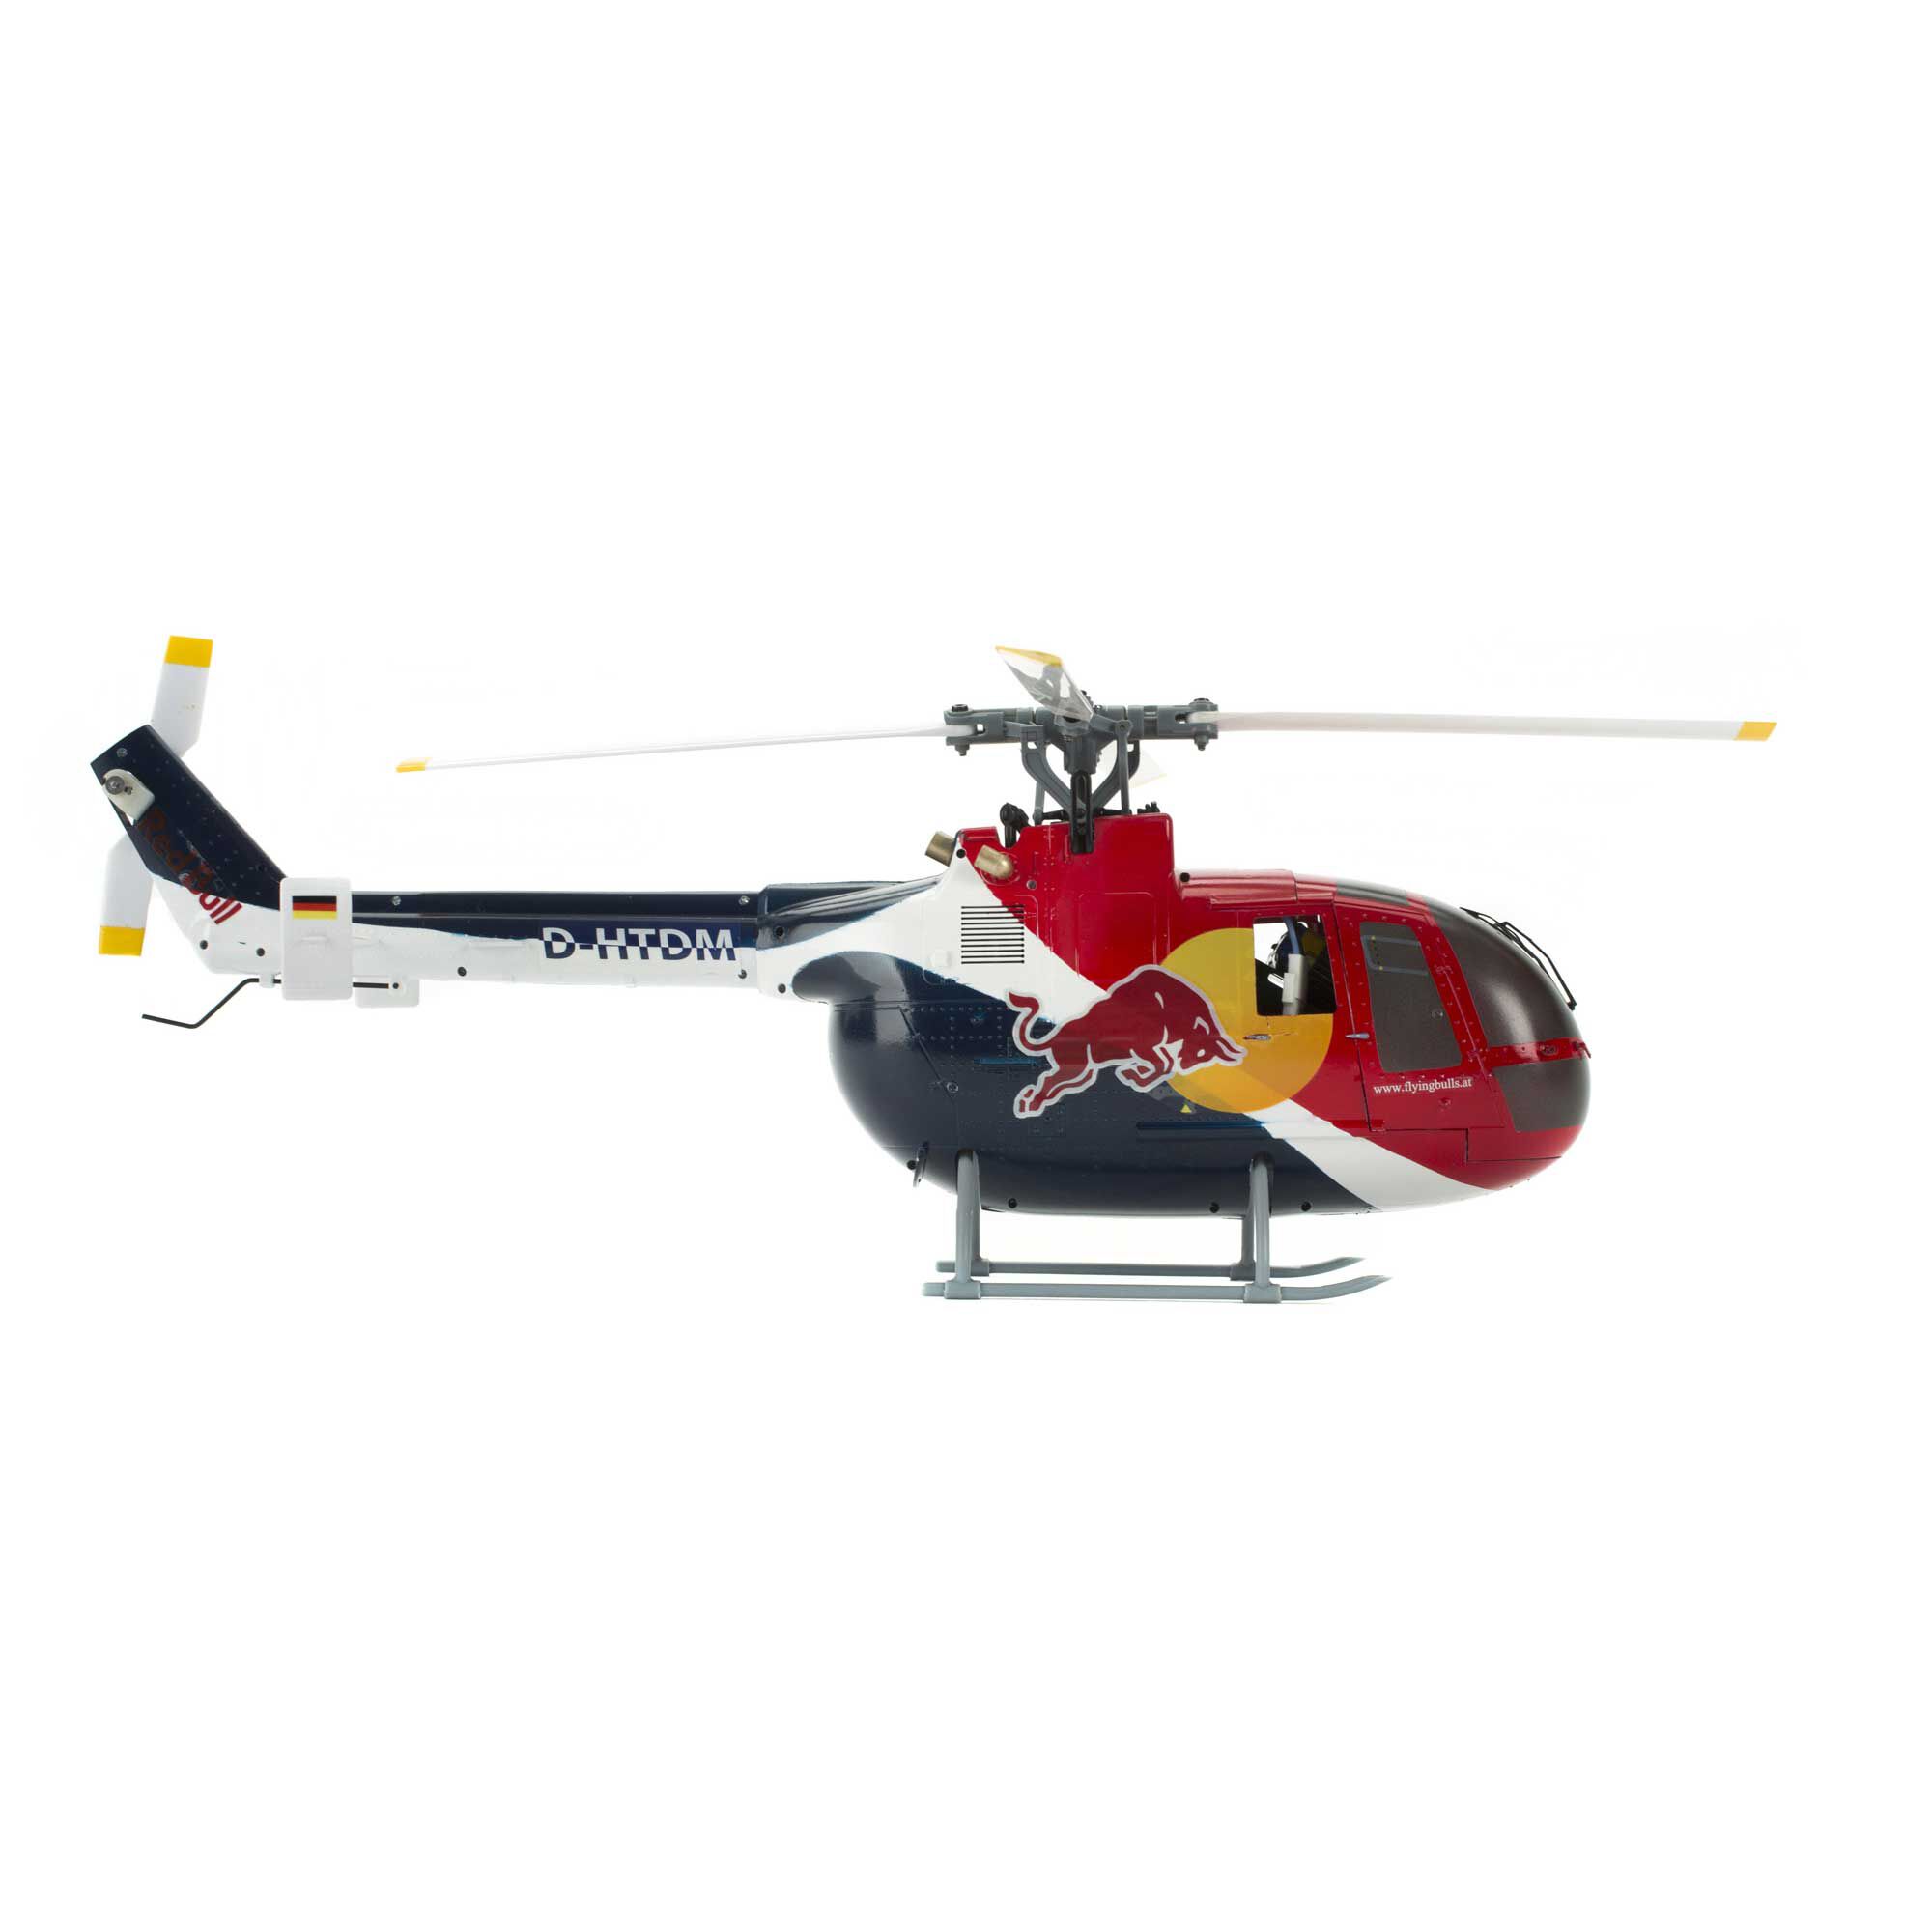 130x bnf rc helicopter